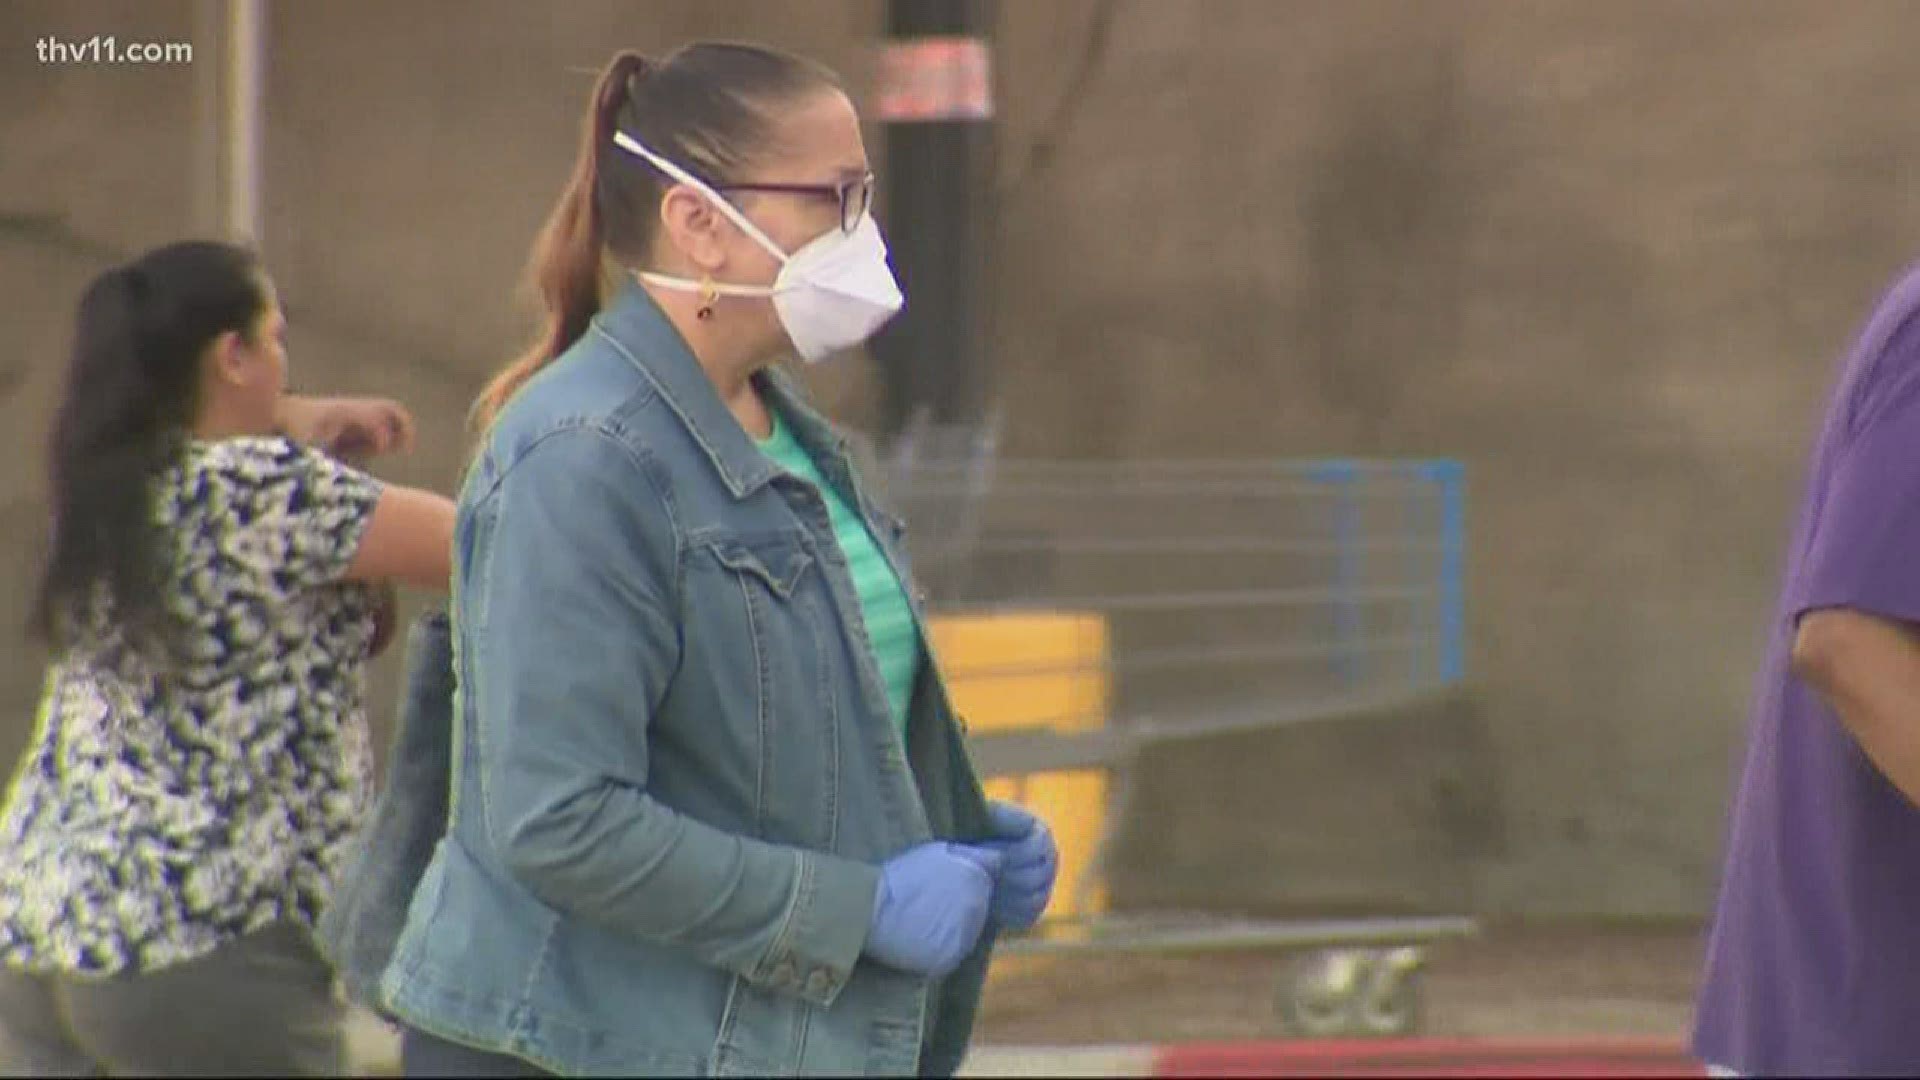 One of the Arkansas Department of Health's top doctors said previous studies show face masks could be just as effective as a vaccine during the COVID-19 pandemic.